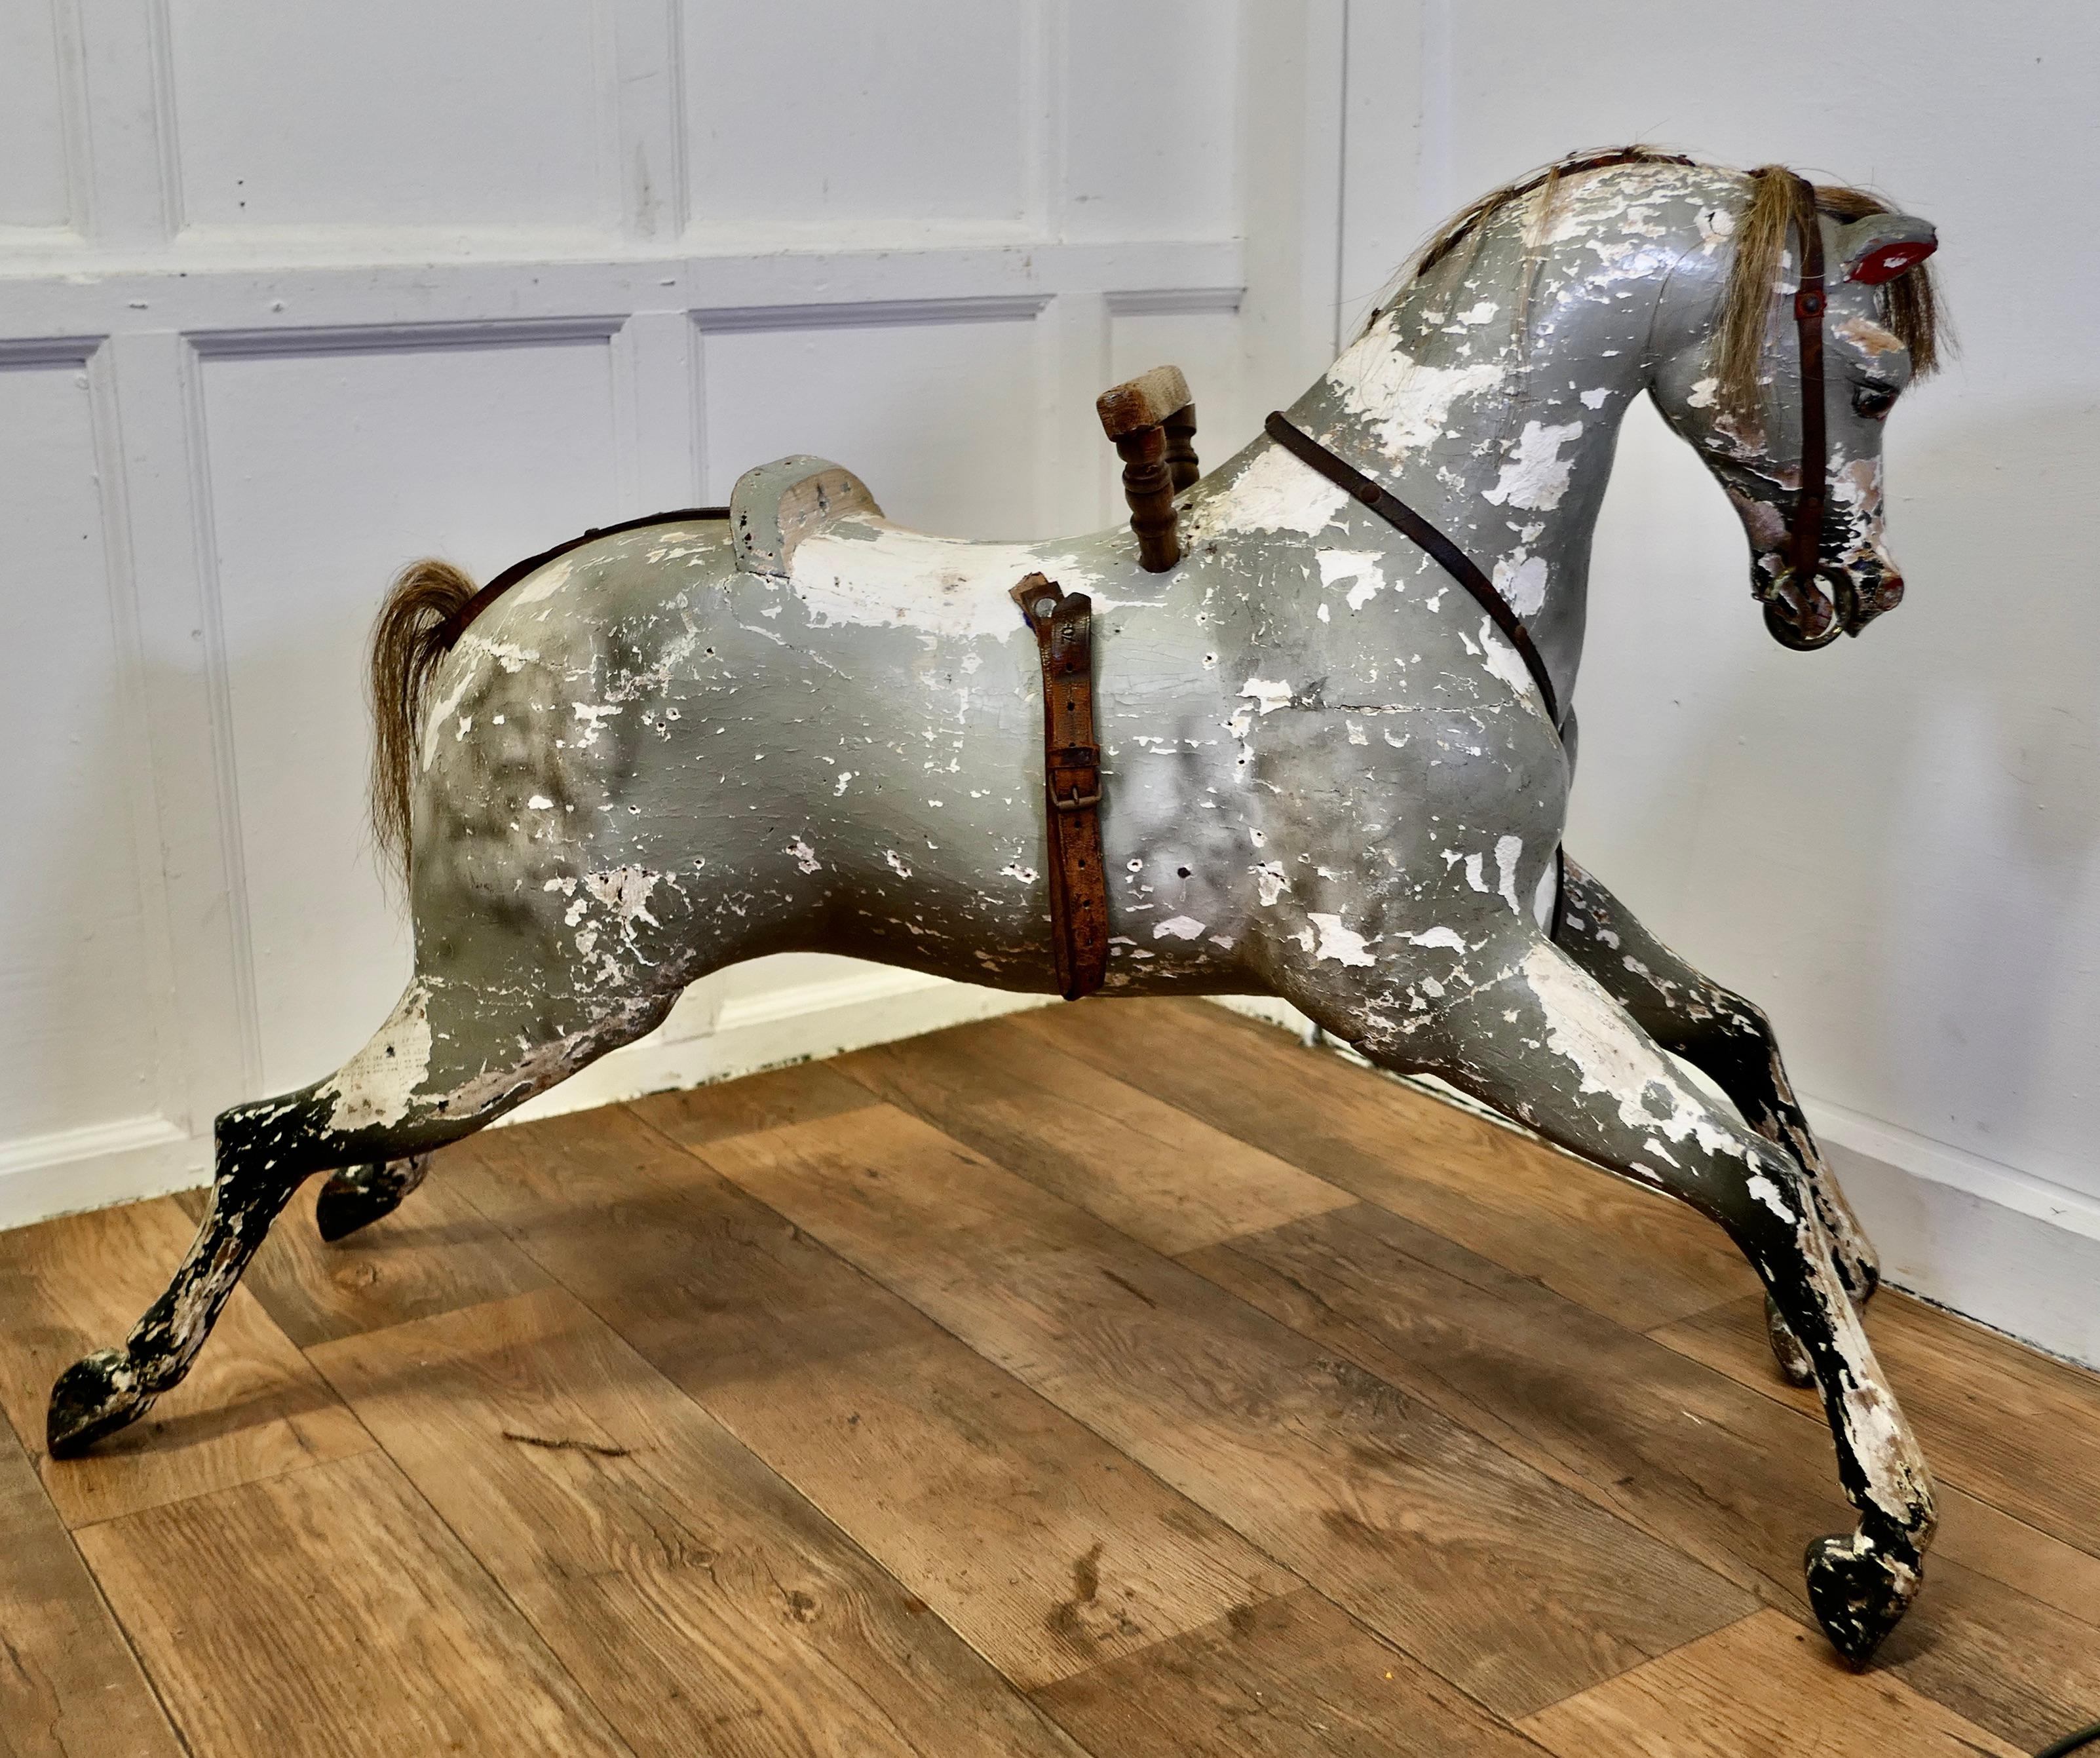 Early 19th Century Wooden Horse

A handsome Dapple Grey galloper with Horse Hair mane and tail, he has a classic open mouthed expression and bright glass eyes
Our Handsome galloper has a very shapely muscular body and his head tilts slightly to one